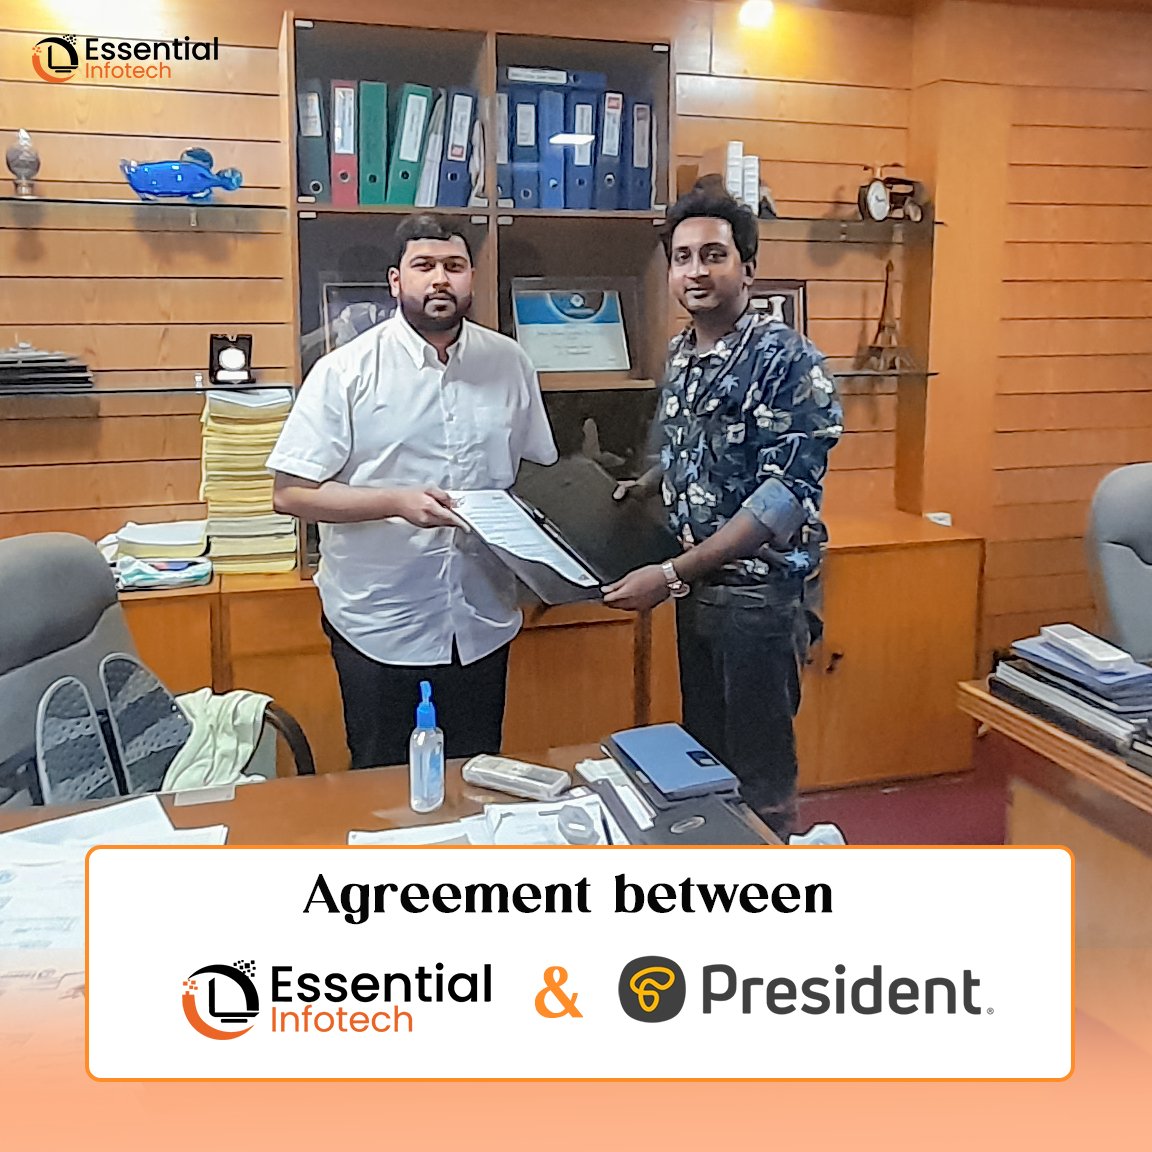 Essential-Infotech has officially signed an agreement with President Luggages. This collaboration marks a significant milestone for us, paving the way for innovative solutions and greater achievements. Stay tuned for more updates!